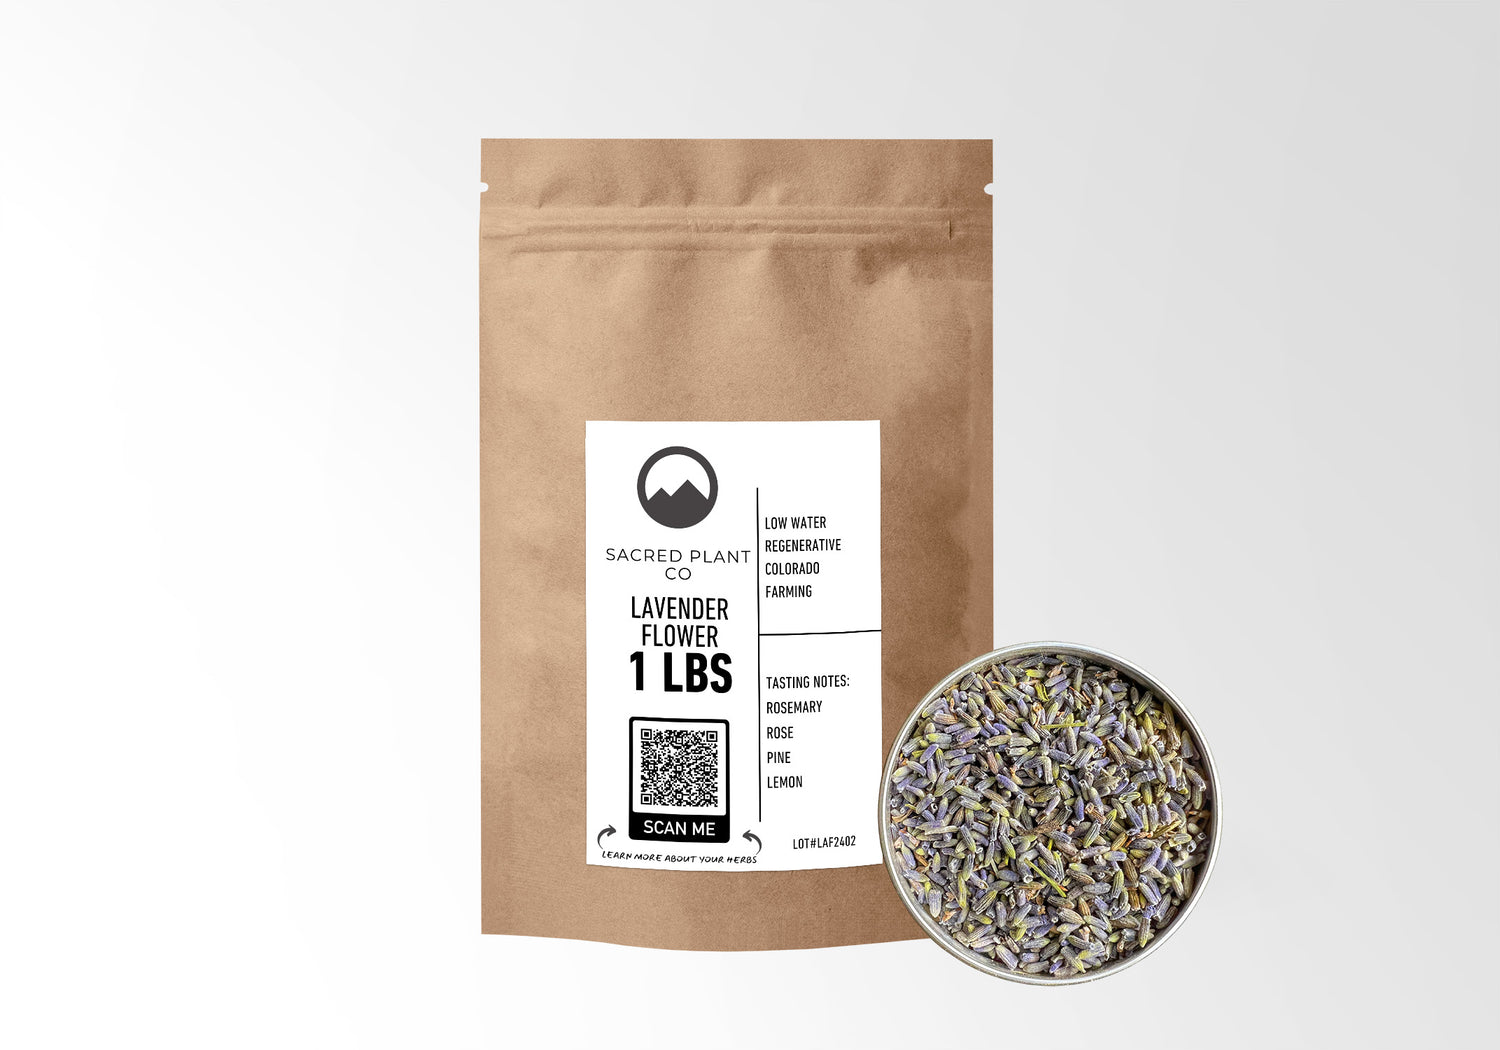 Image of a 1-pound paper bag of premium quality lavender flowers by Sacred Plant Co. The bag is made of natural brown kraft paper and features a simple, elegant black and white label that reads &